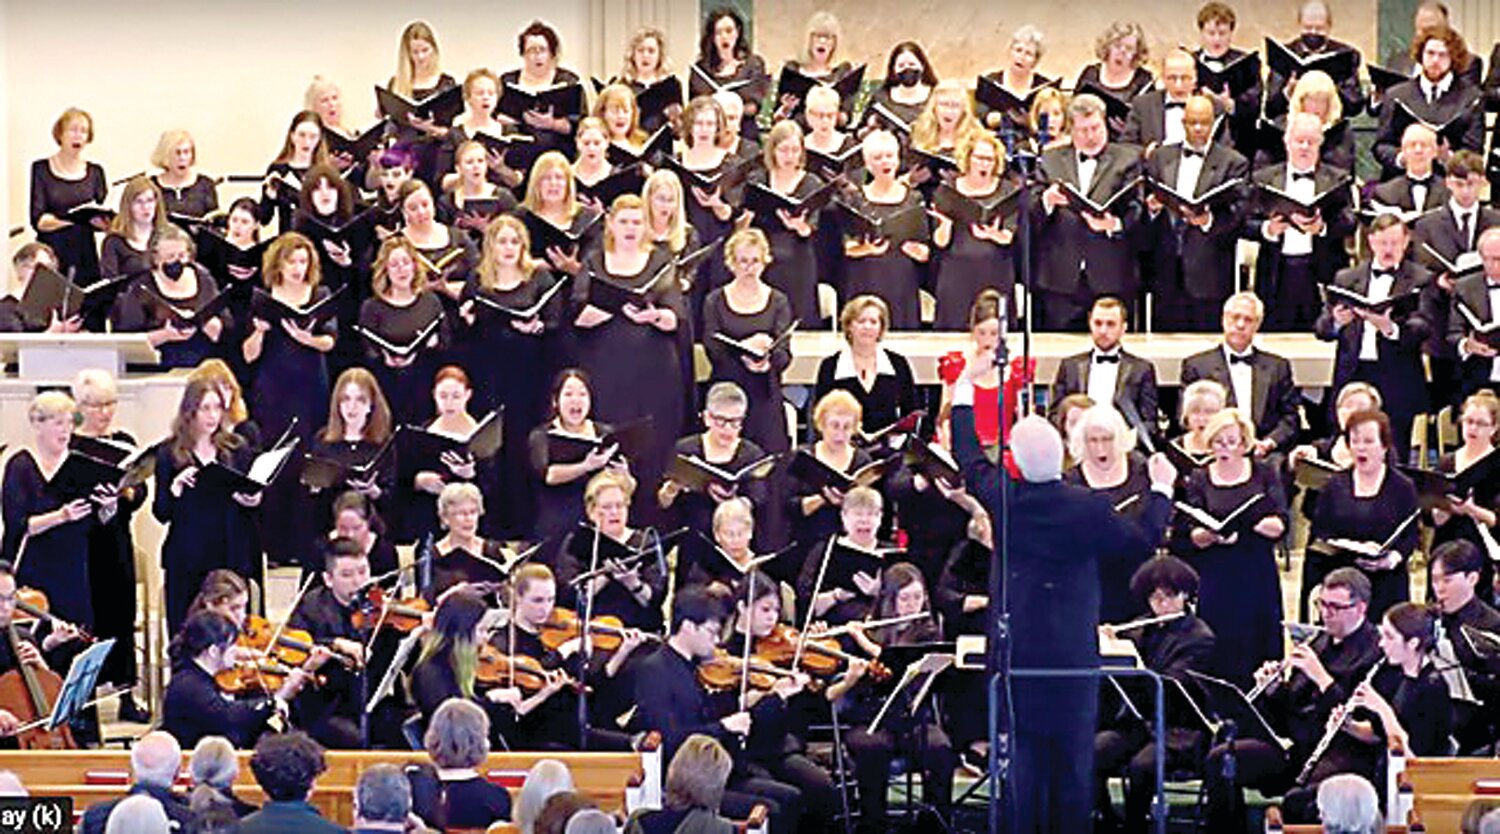 Bucks County Choral Society is set for its season opening concert.